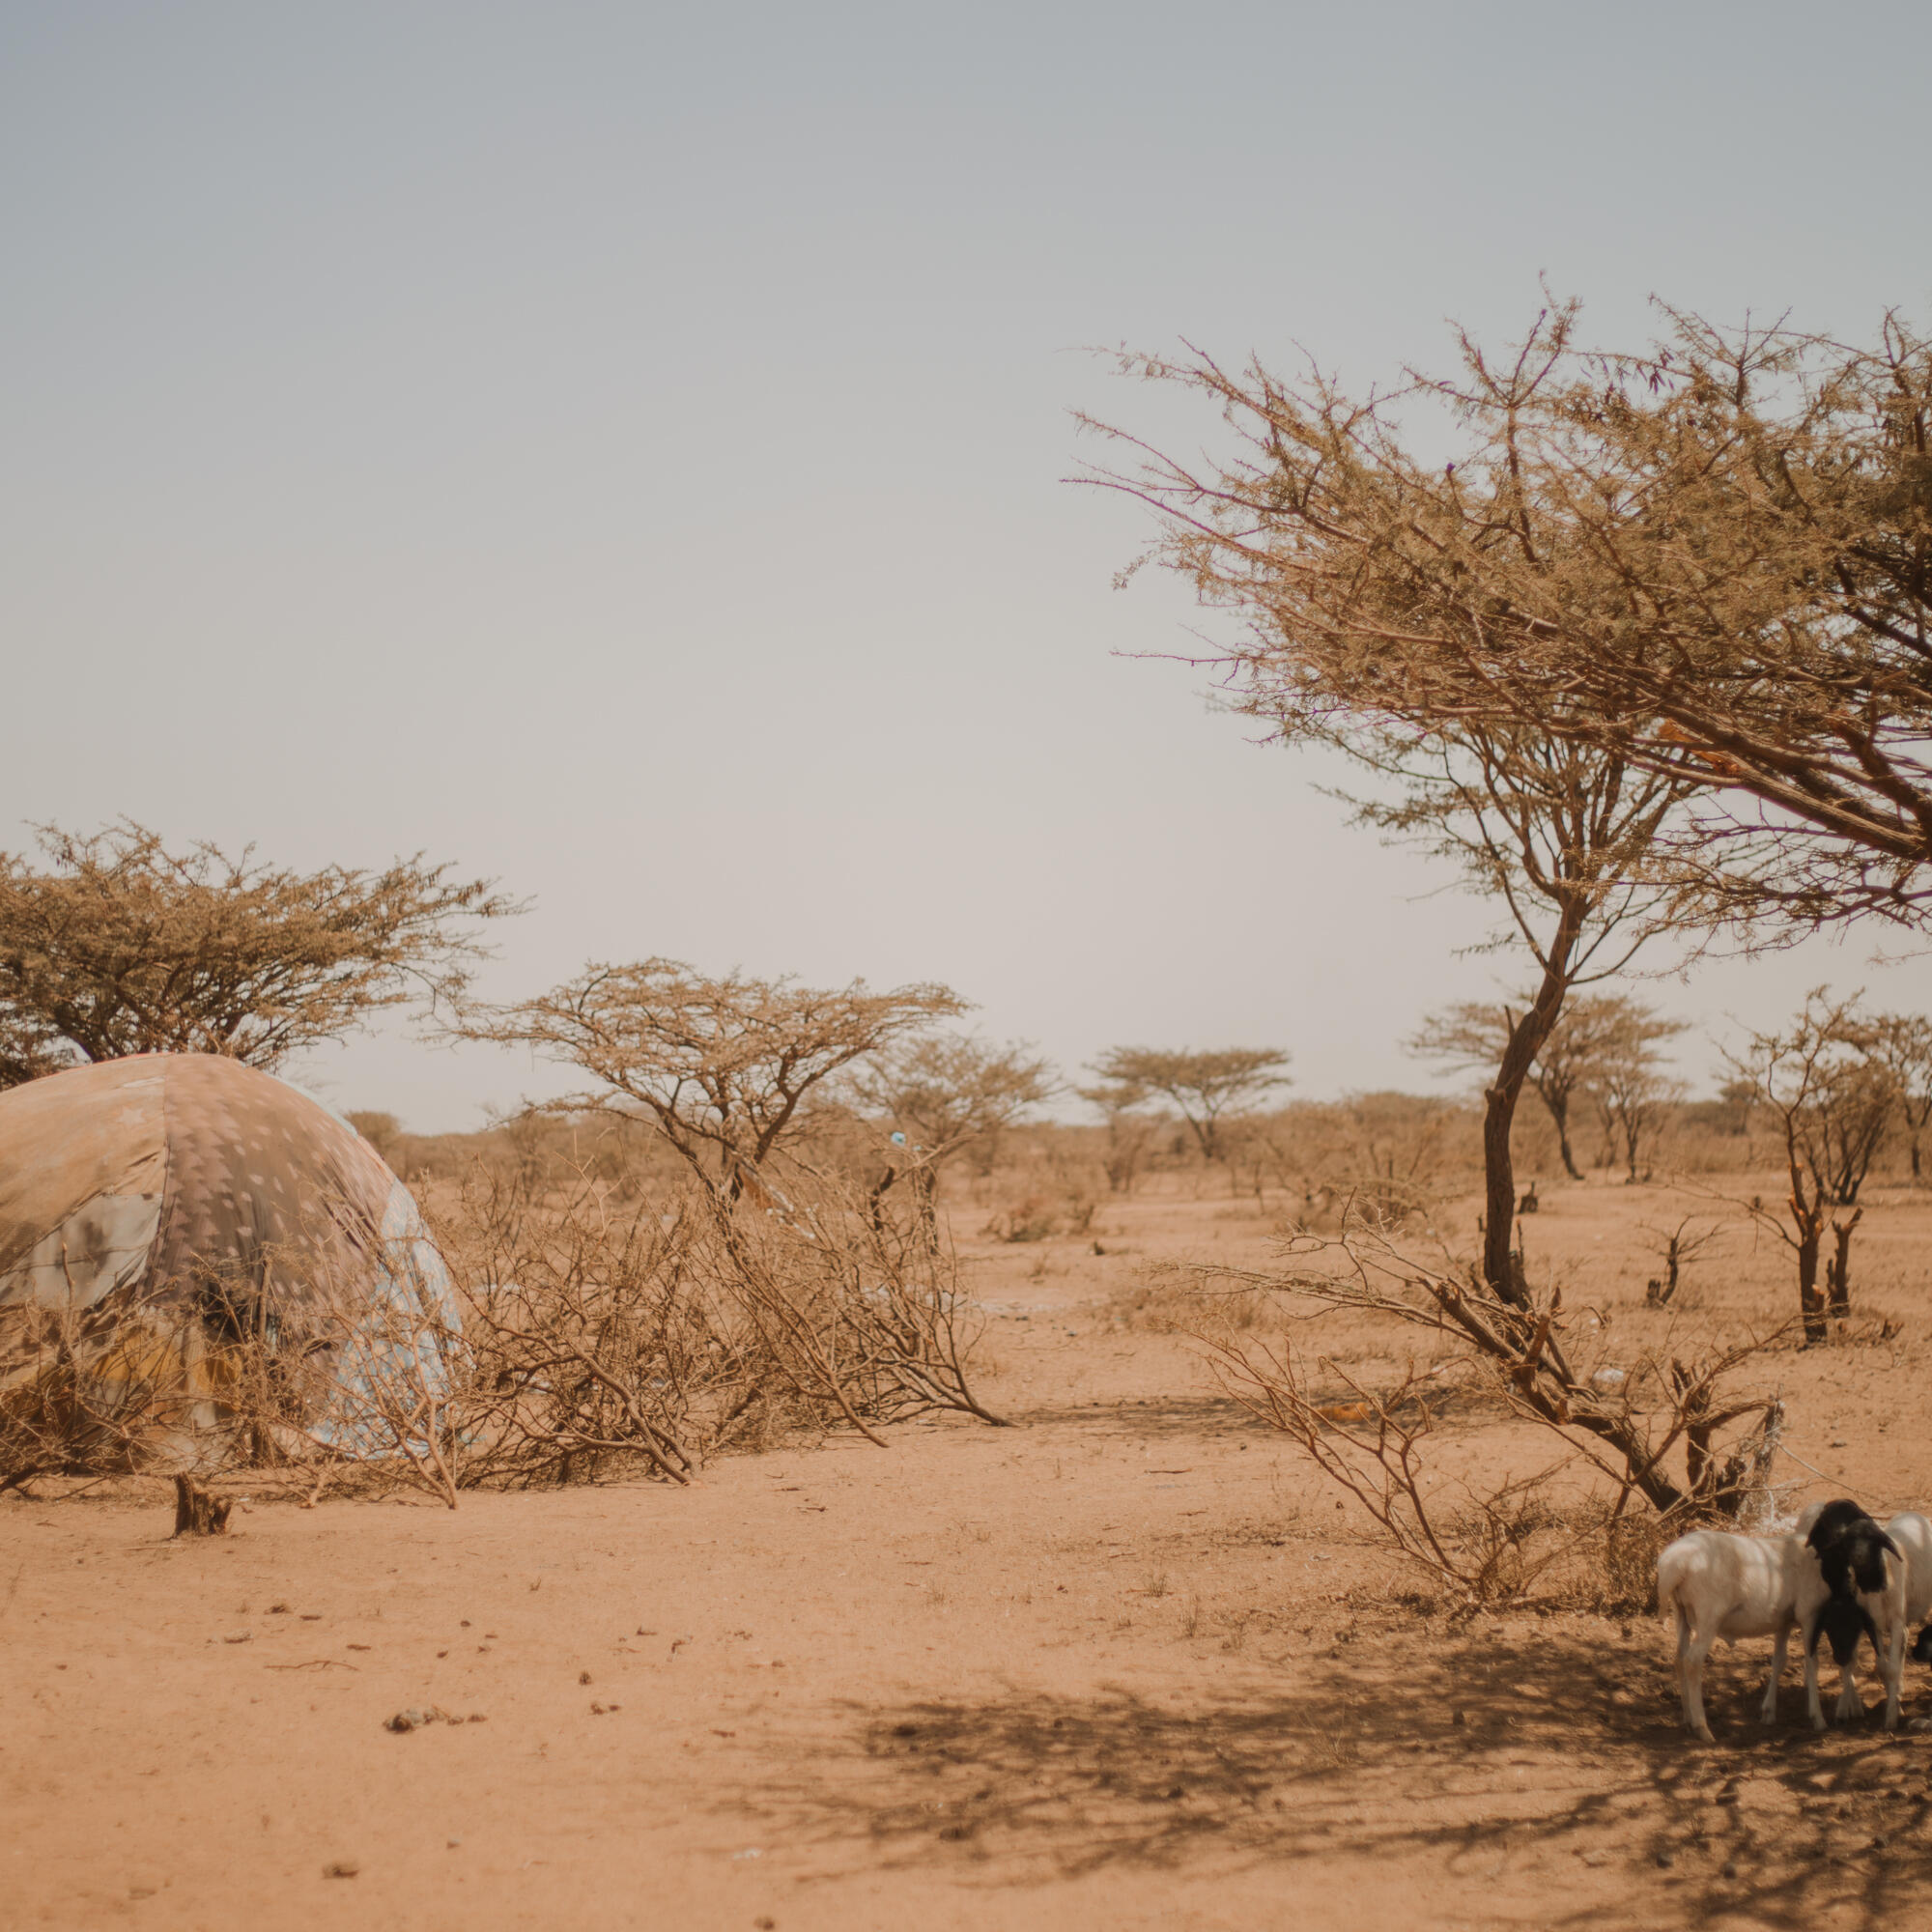 A barren, dry landscape with a shelter a few goats lying in the shade of a dead tree,